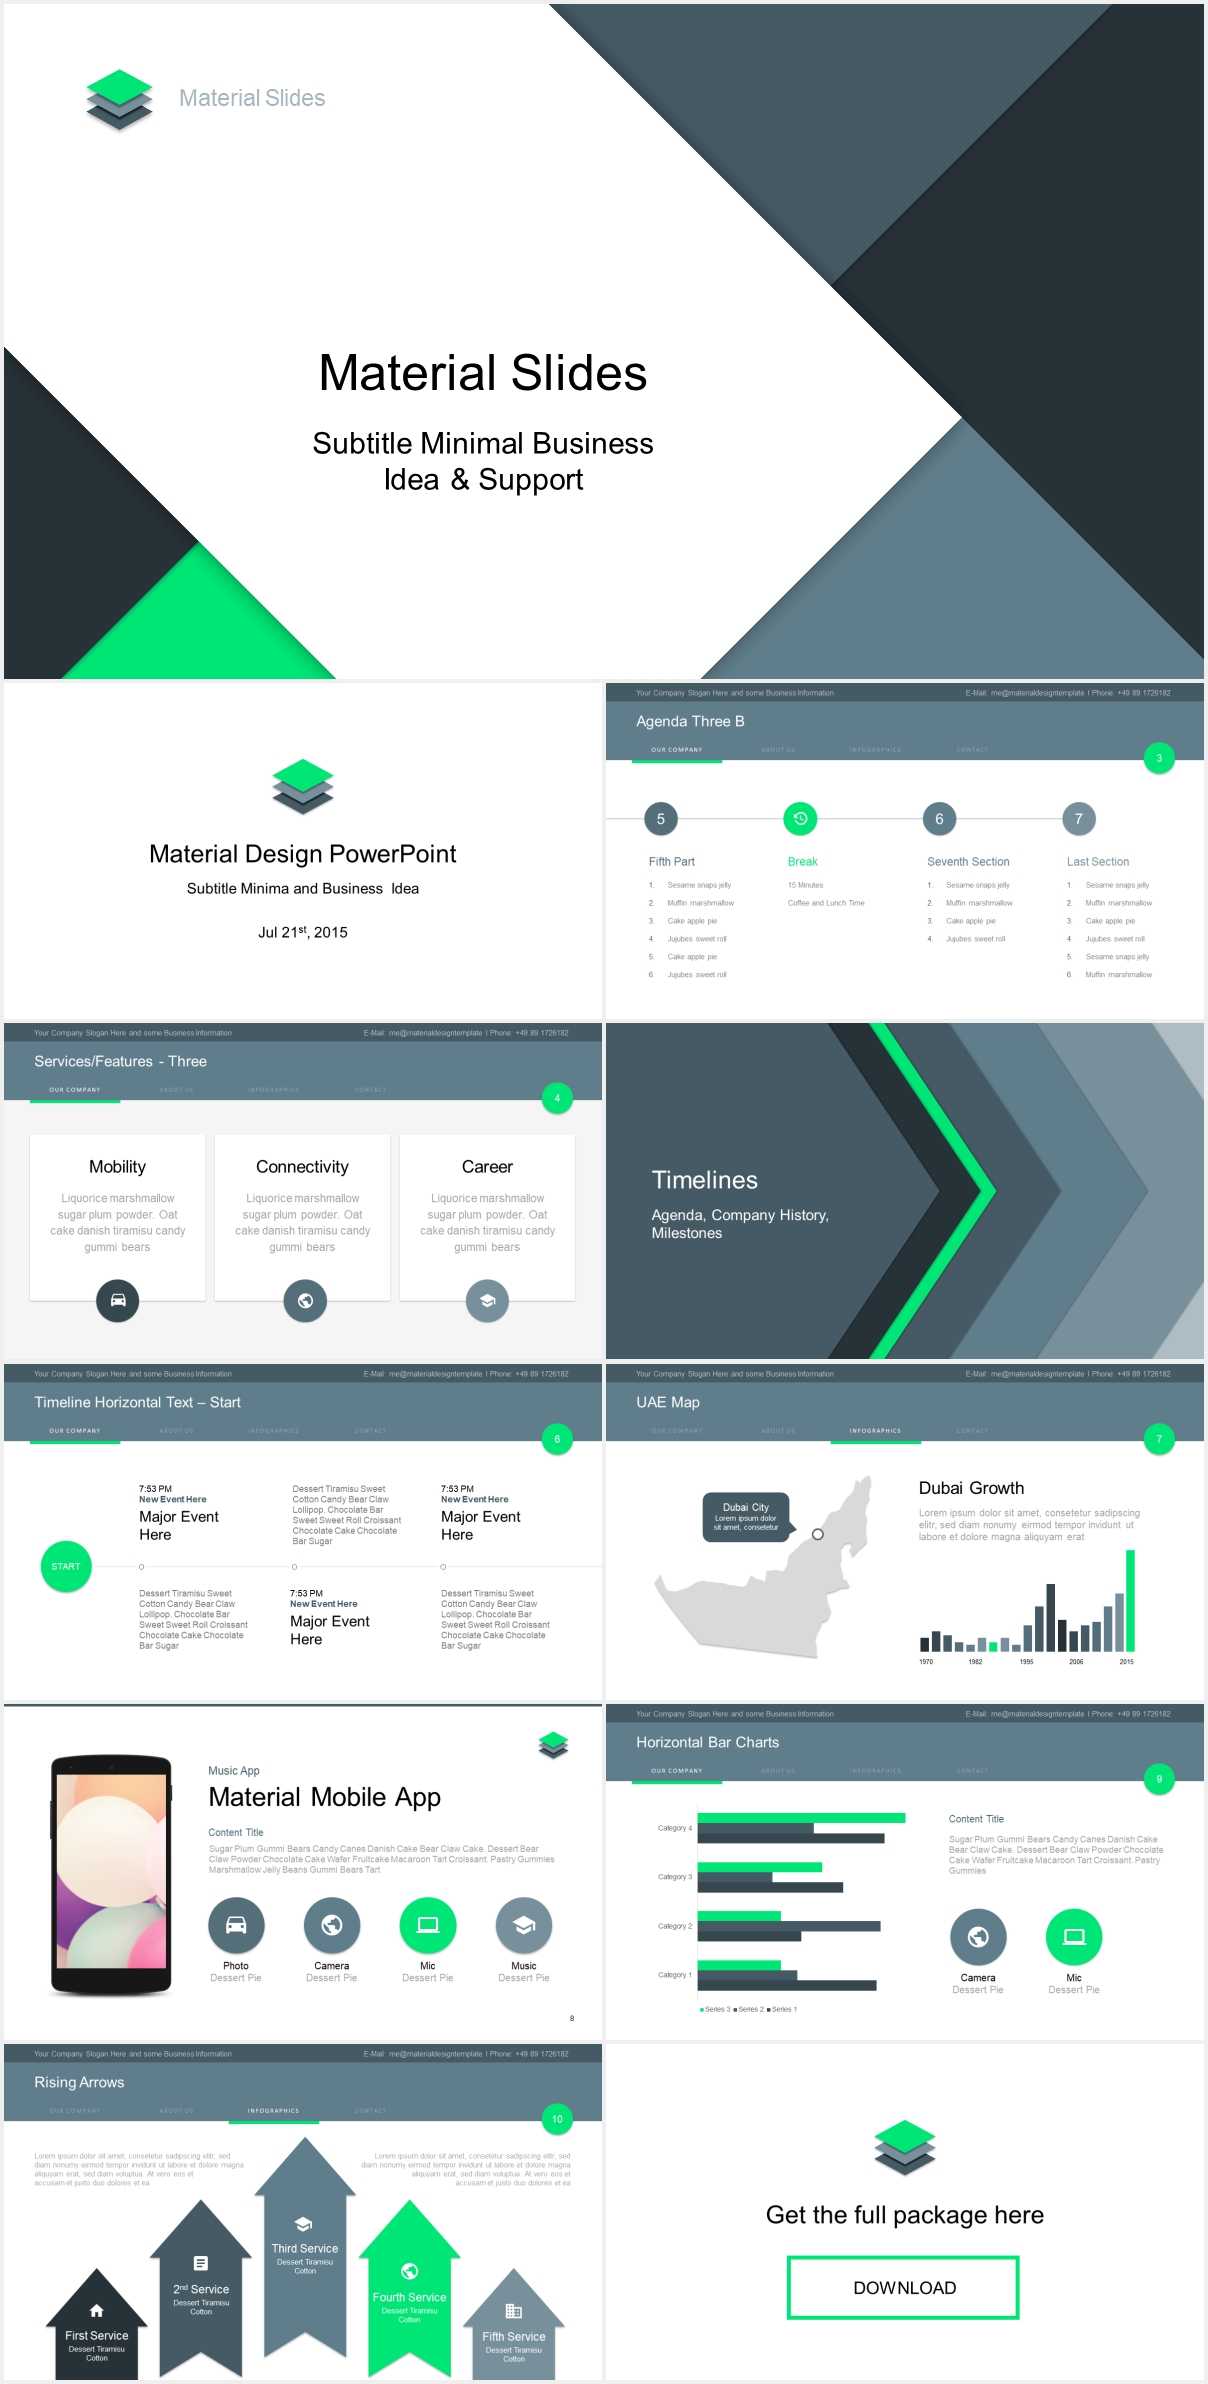 Material Design Powerpoint Template – Just Free Slides Regarding Powerpoint Slides Design Templates For Free